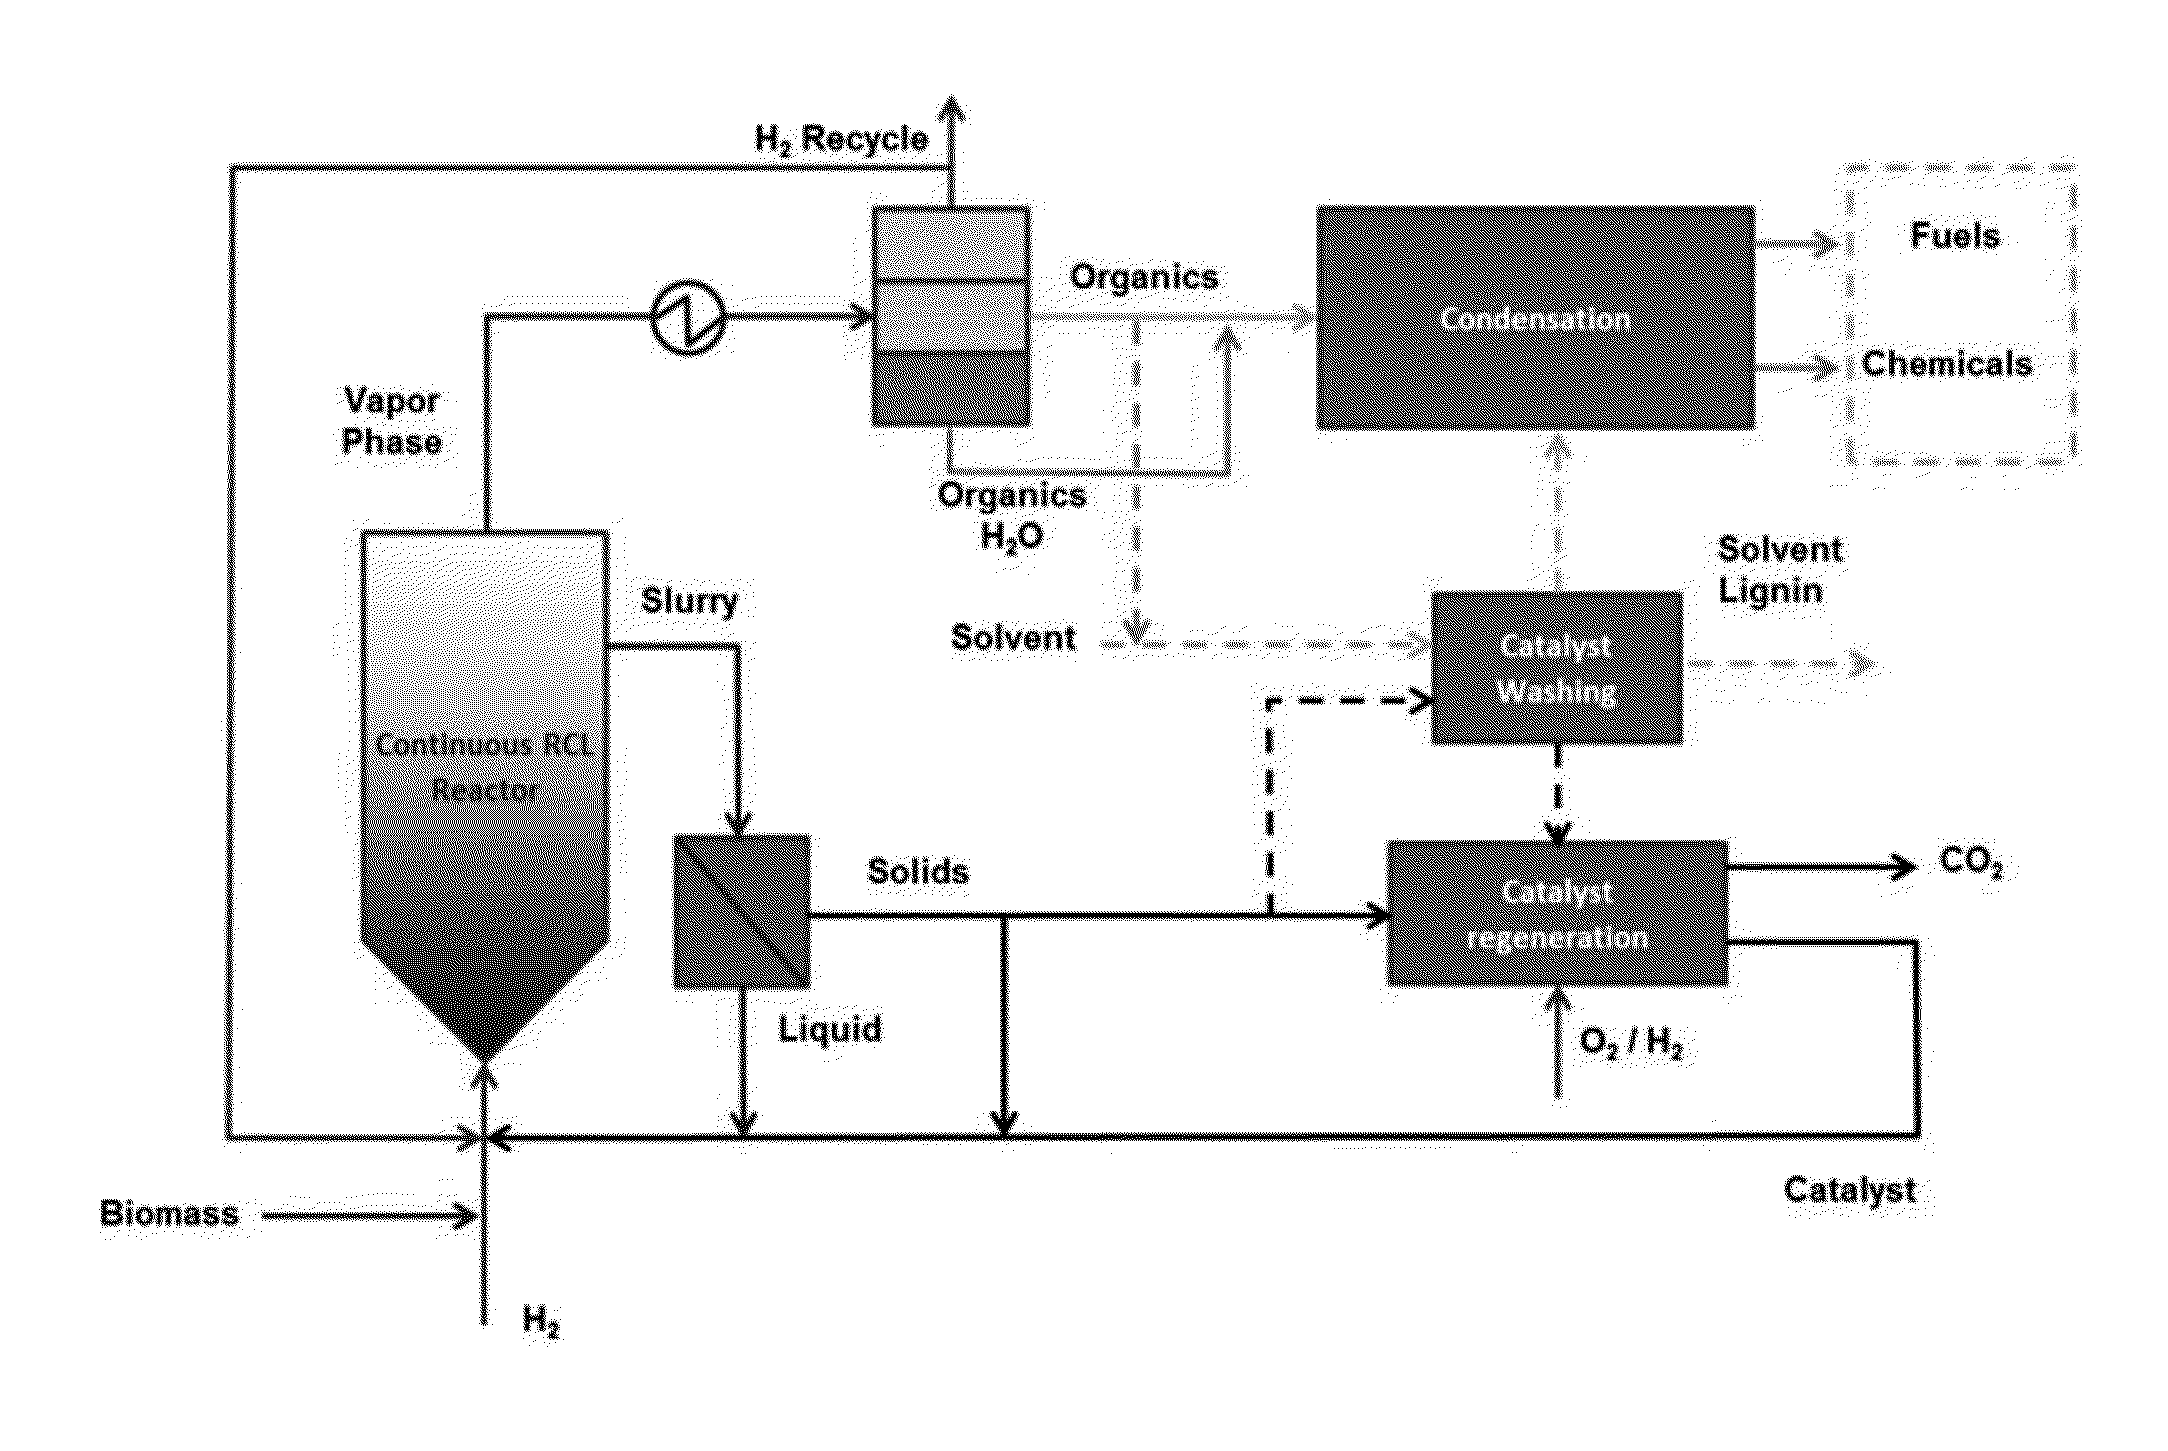 Production of chemicals and fuels from biomass